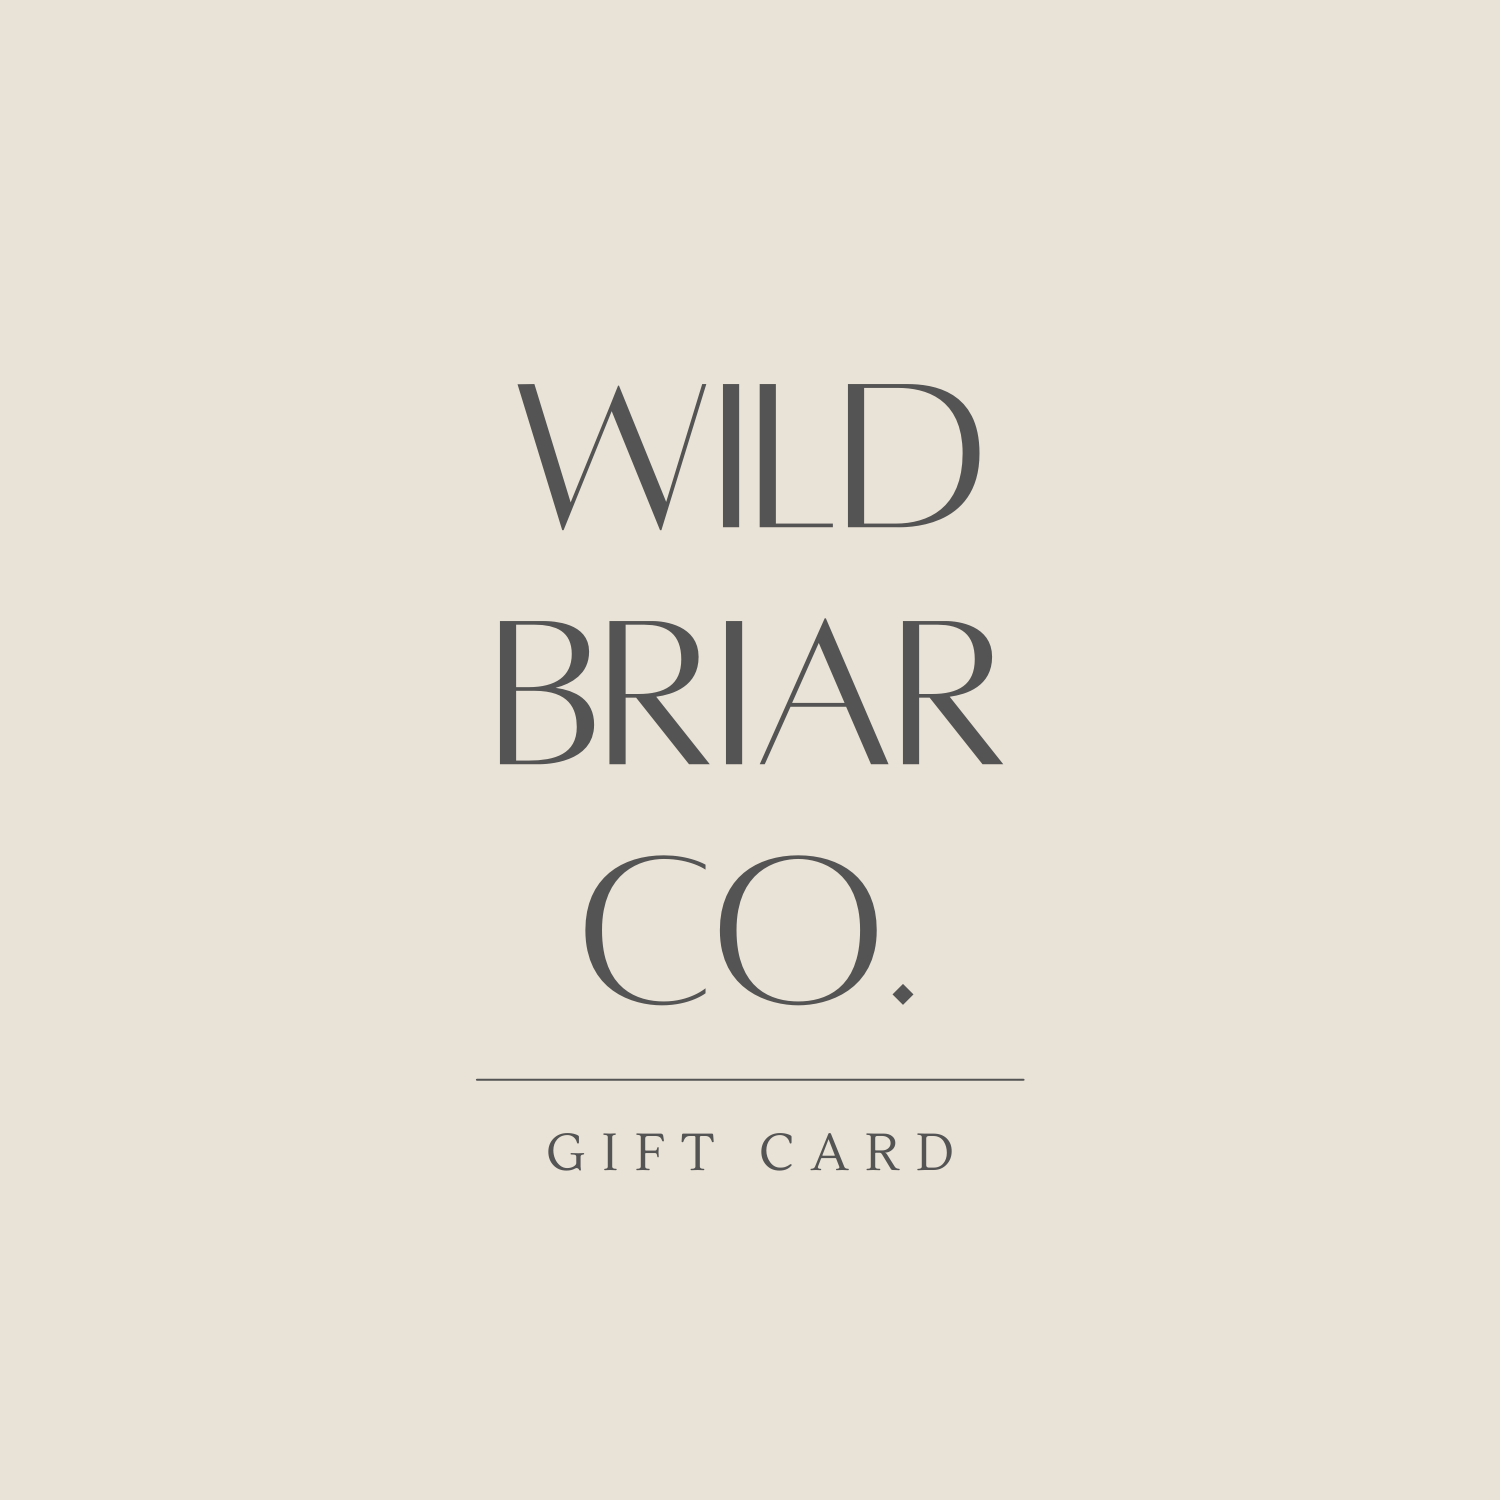 Wild Briar Co. Gift Cards